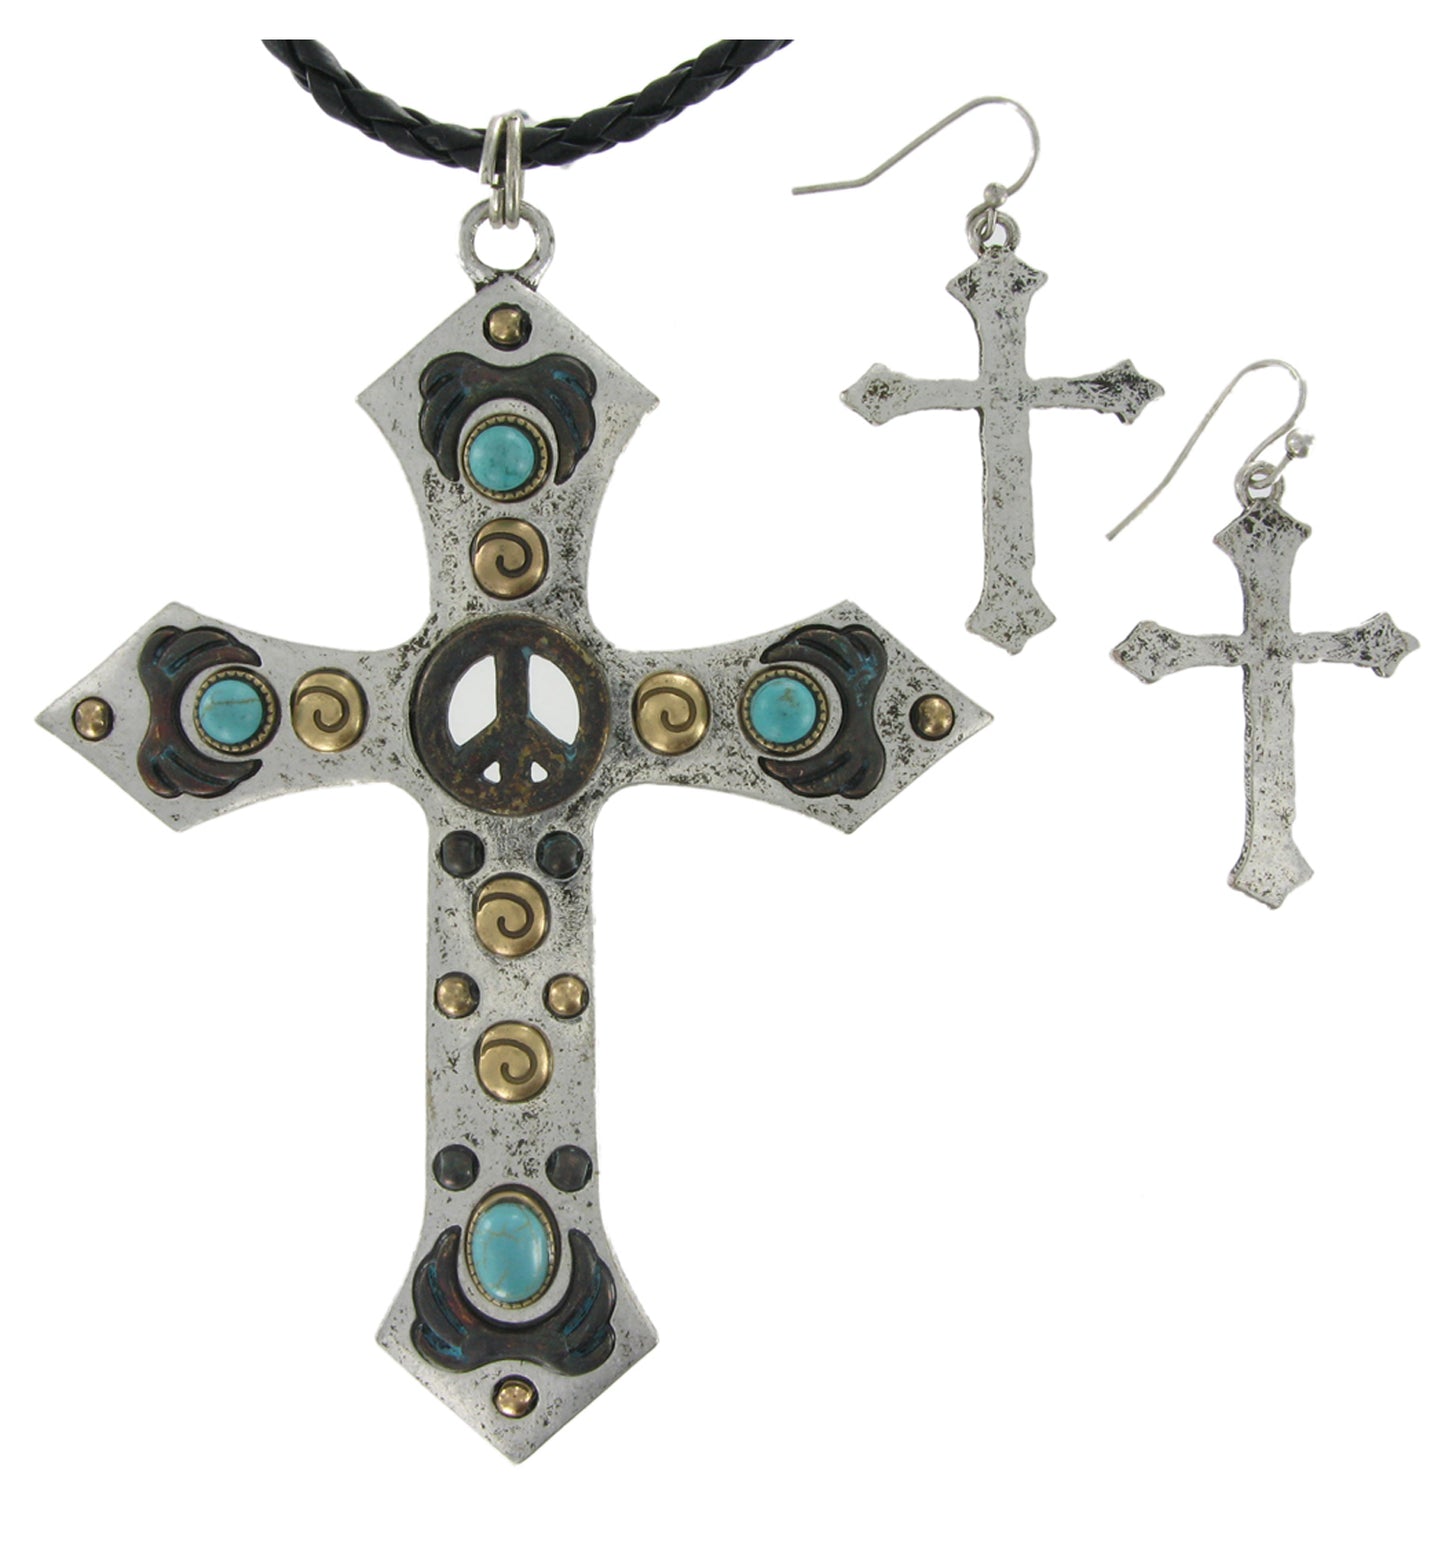 Womens Jewelry Set Antiqued Silver Tone Crucifix Cross Pendant Necklace Earrings